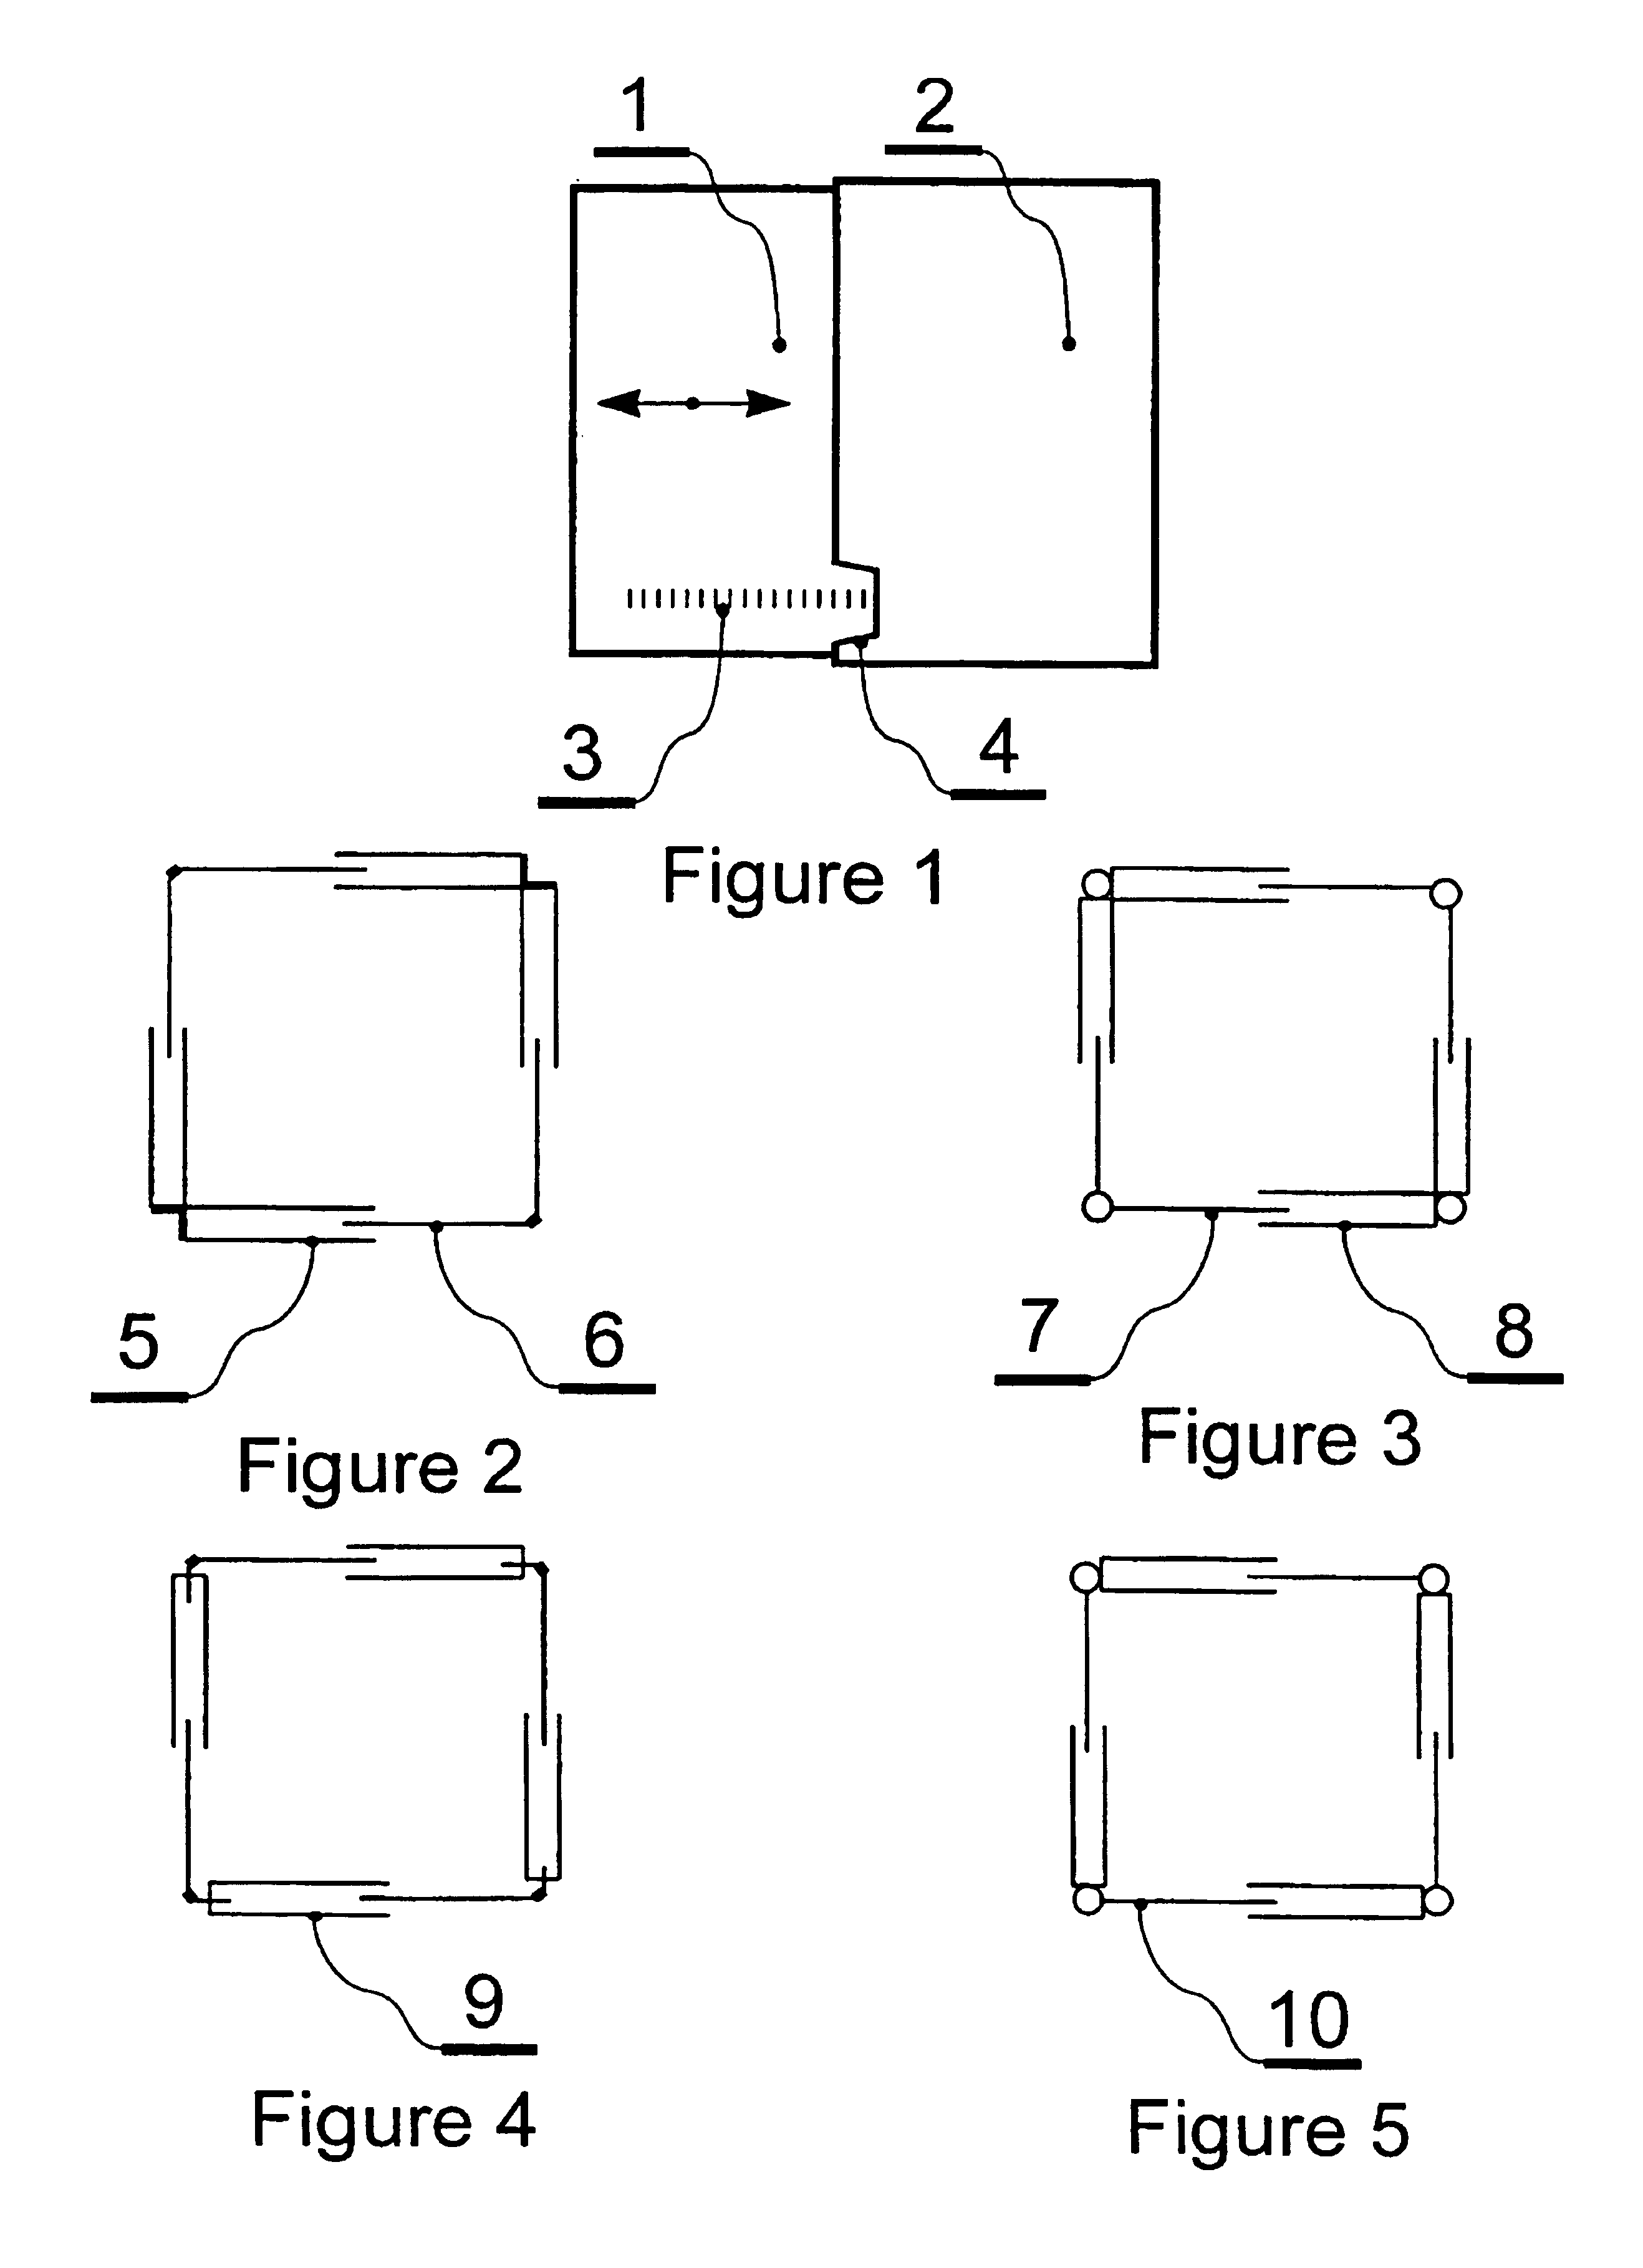 Adaptable device for delimiting and organizing spaces and volumes